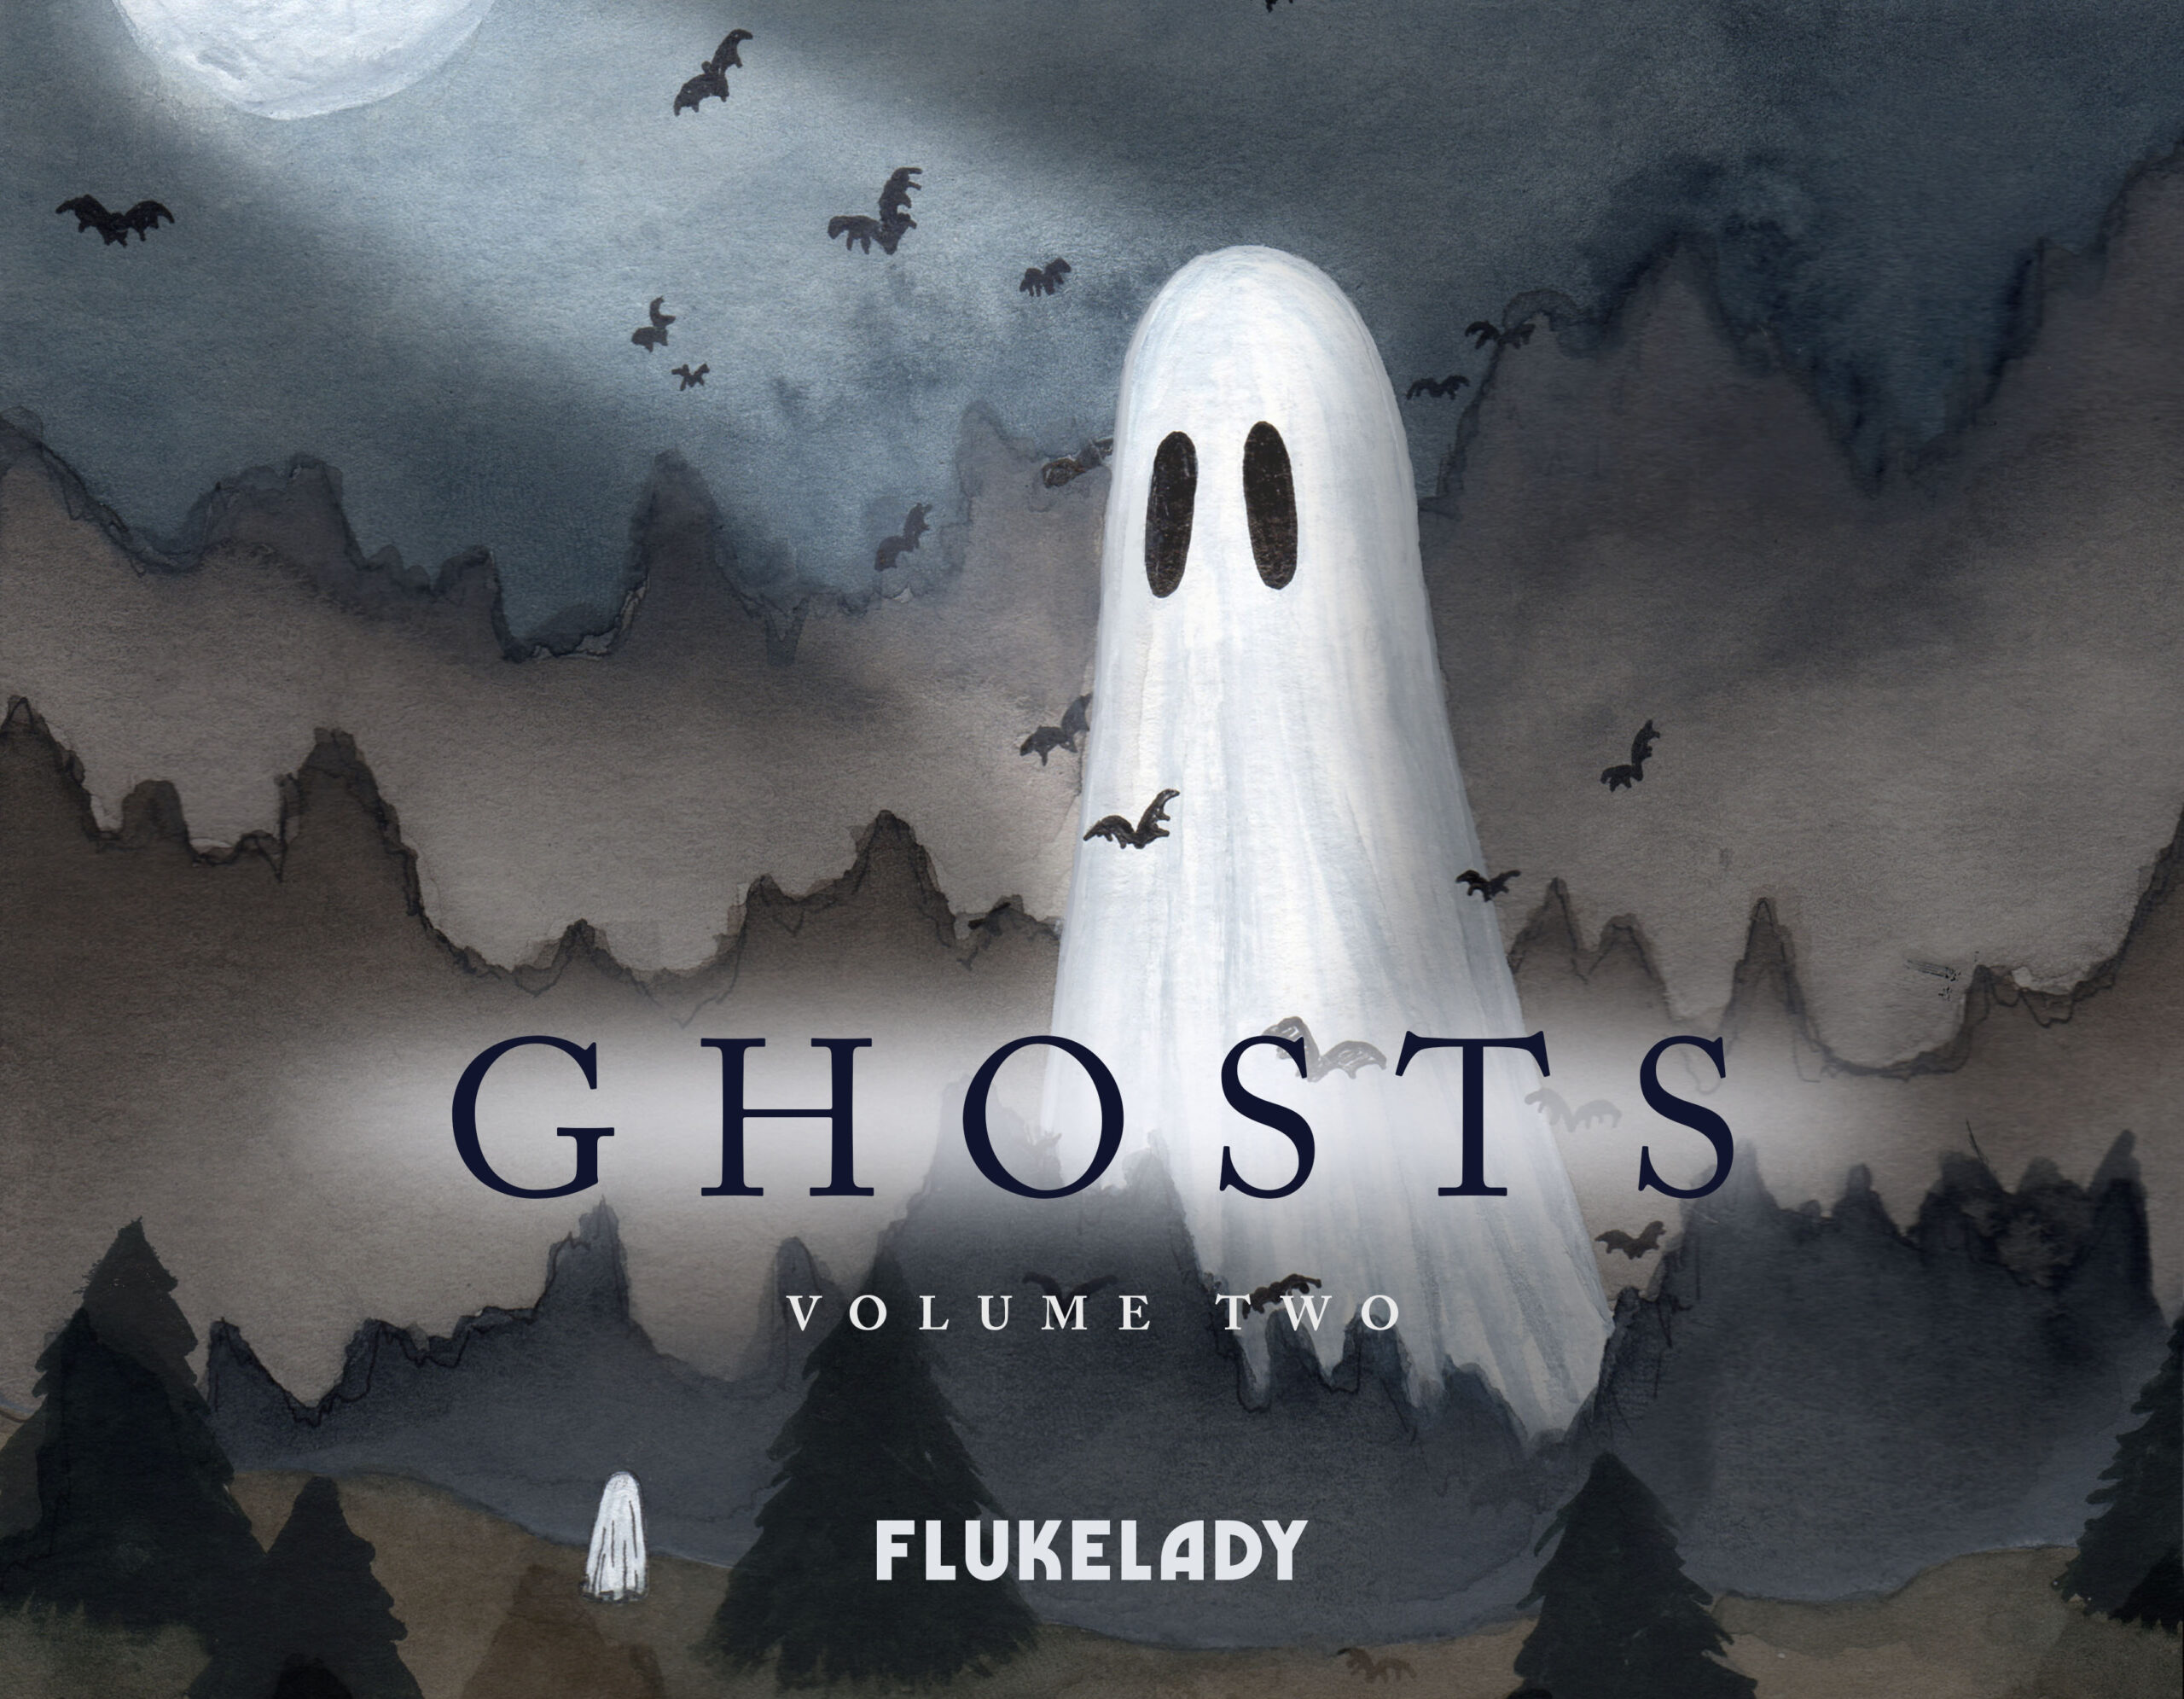 Ghosts Volume Two Book Cover